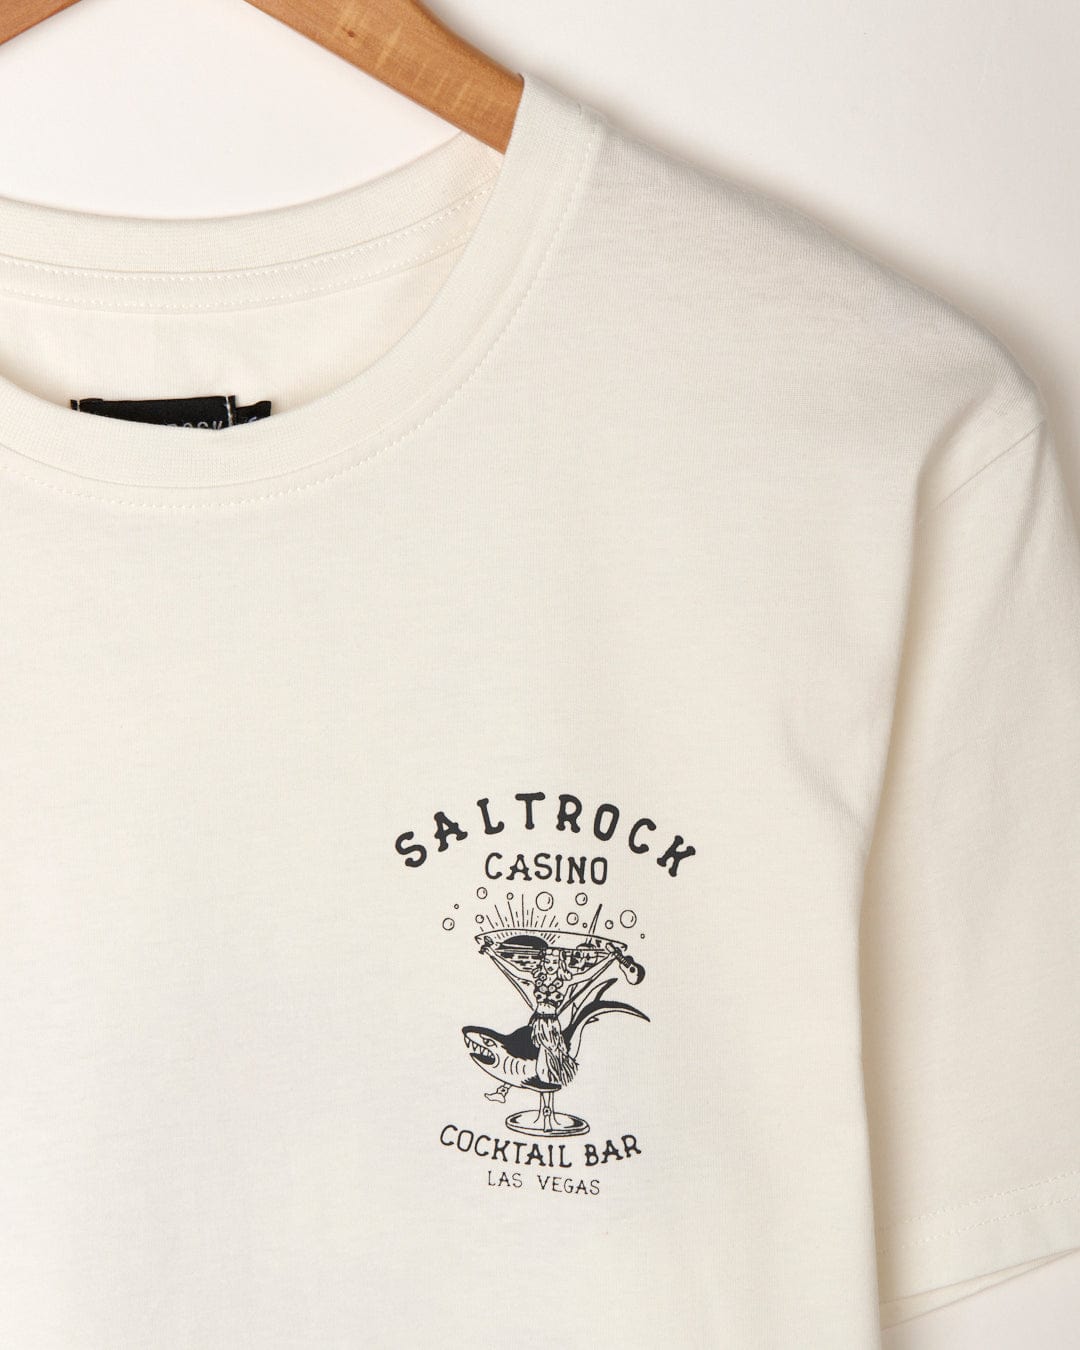 Close-up of a white Vegas Cocktail - Mens Short Sleeve T-Shirt with the Saltrock logo printed on the front, featuring a peached soft hand feel finish.